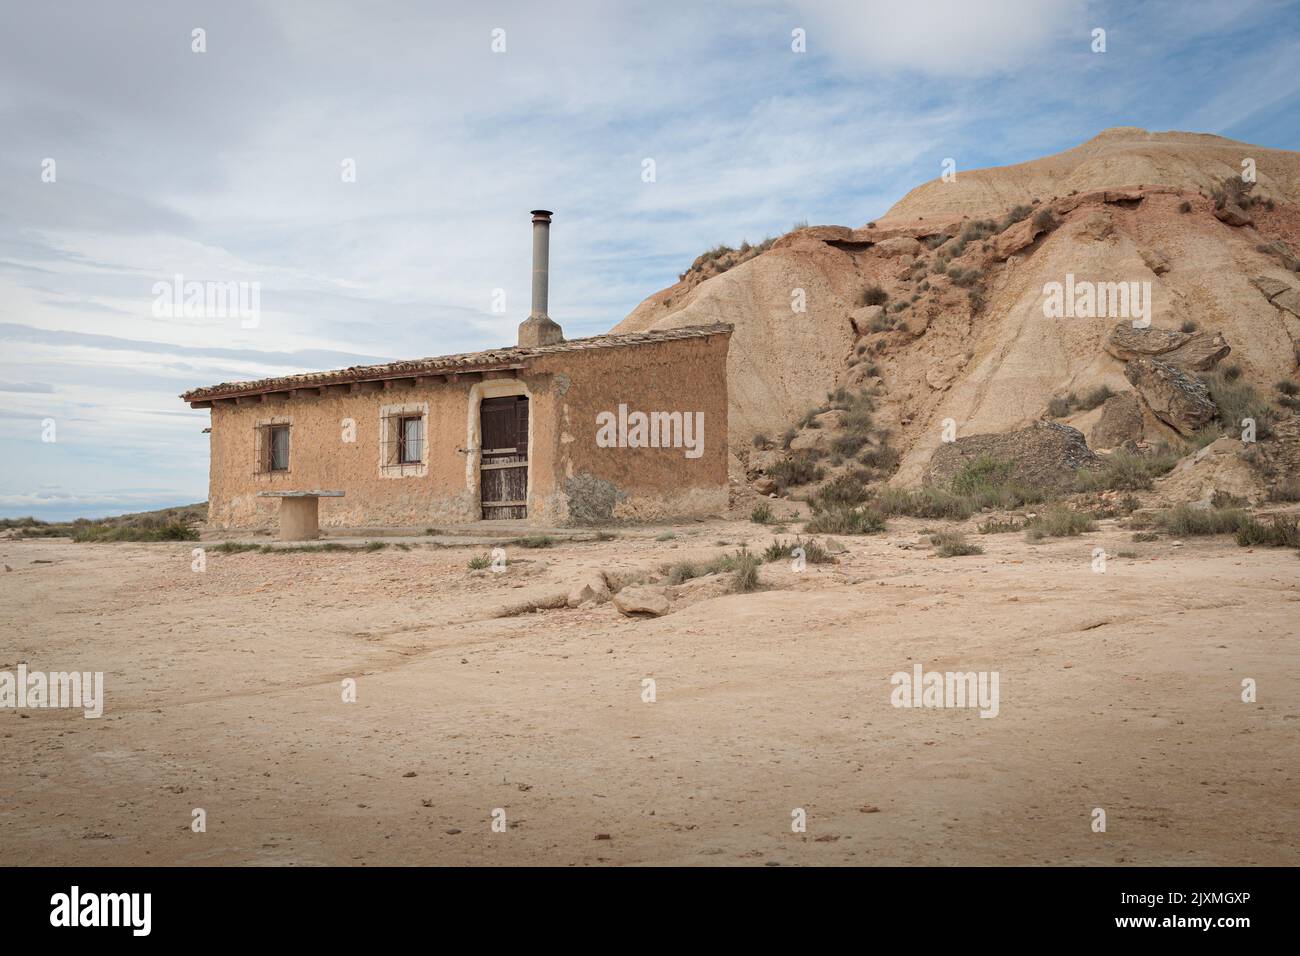 Cabin (lodge, small house) in Badlans of Navarre (Bardenas Reales de Navarra) dessert in the middle of Spain. Stock Photo